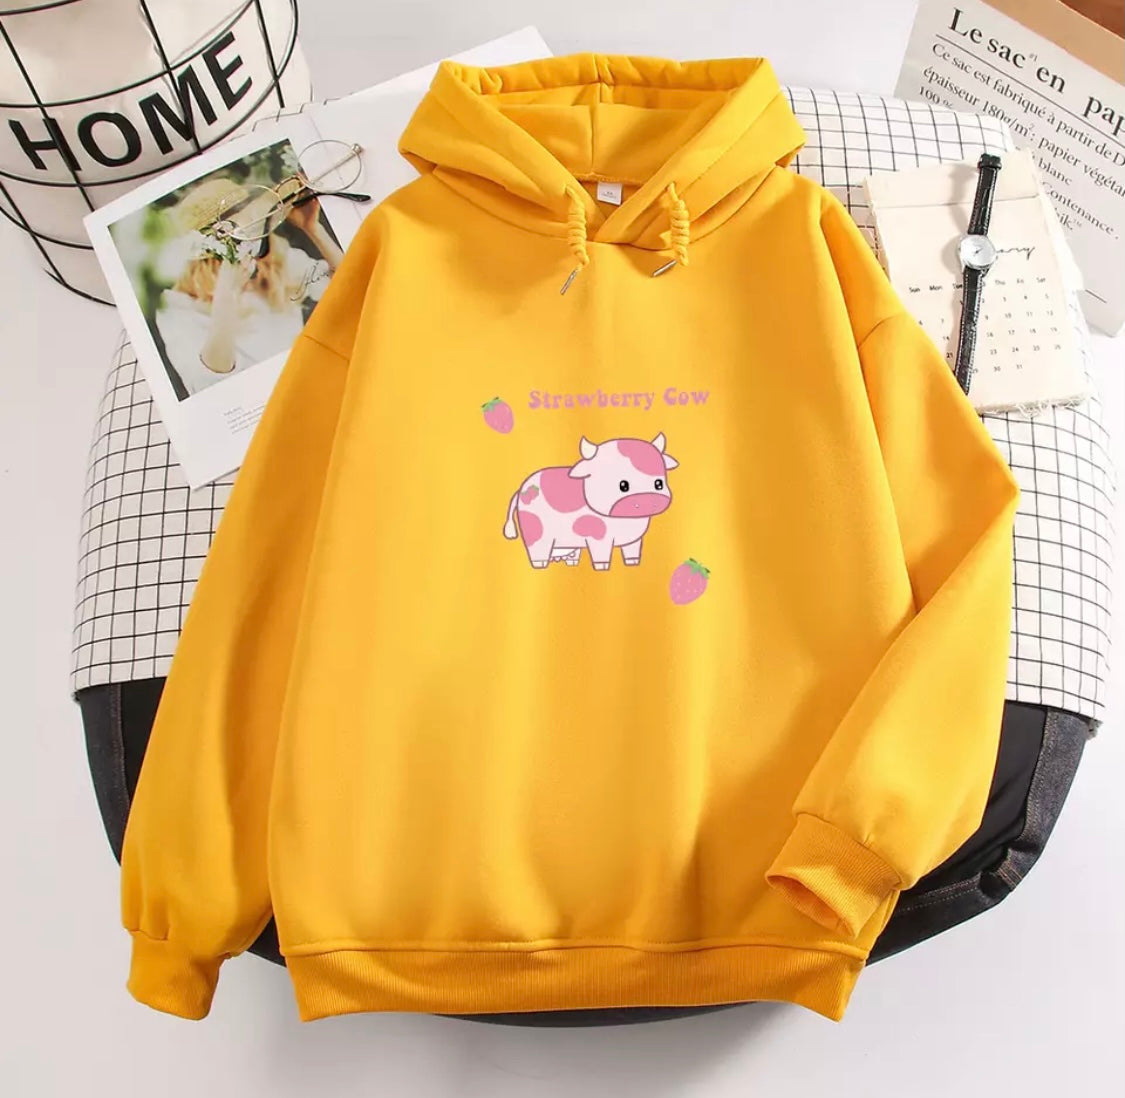 Strawberry Cow Hoodie